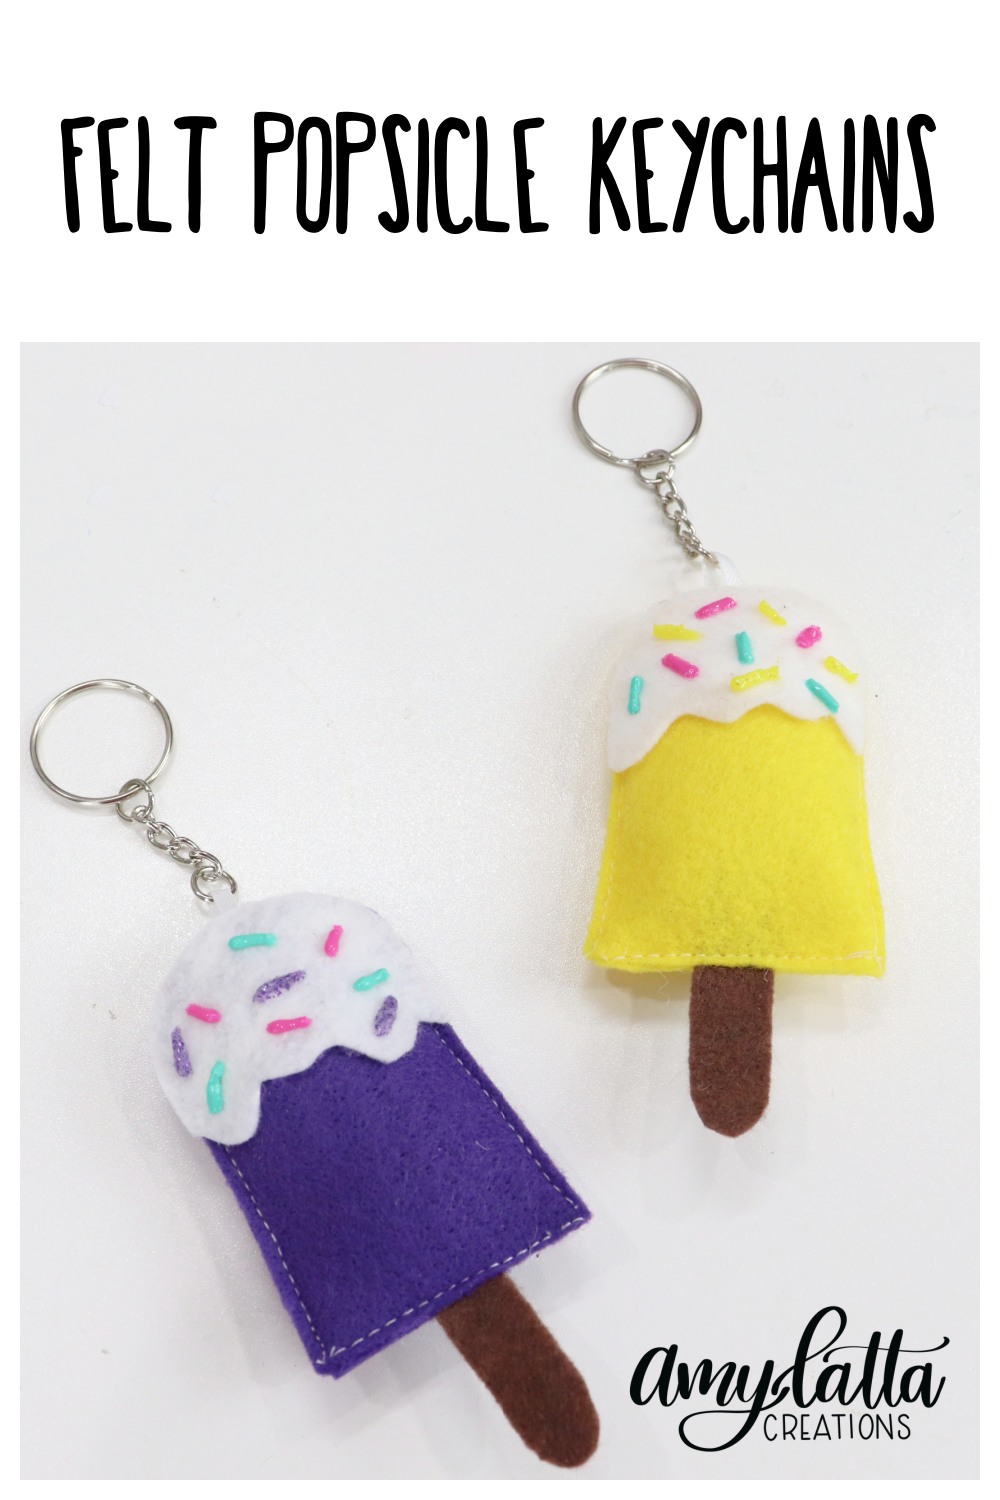 Image contains two popsicle keychains, one purple and one yellow, made from craft felt.